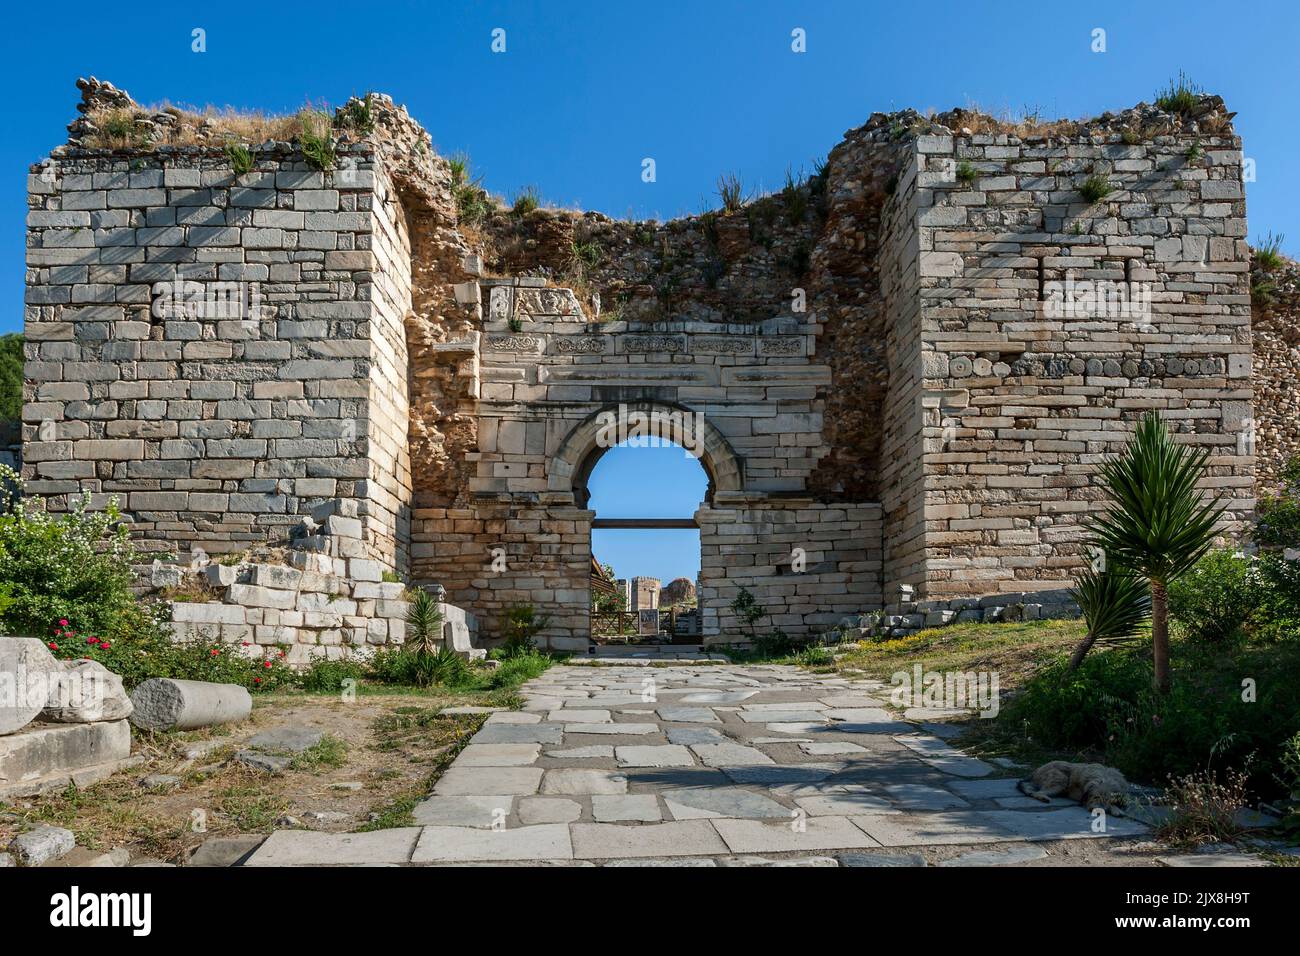 The entrance Gate of Persecution at the ruins of the Basilica of St John at Selcuk in Turkey. It was built in the 6th century. Stock Photo